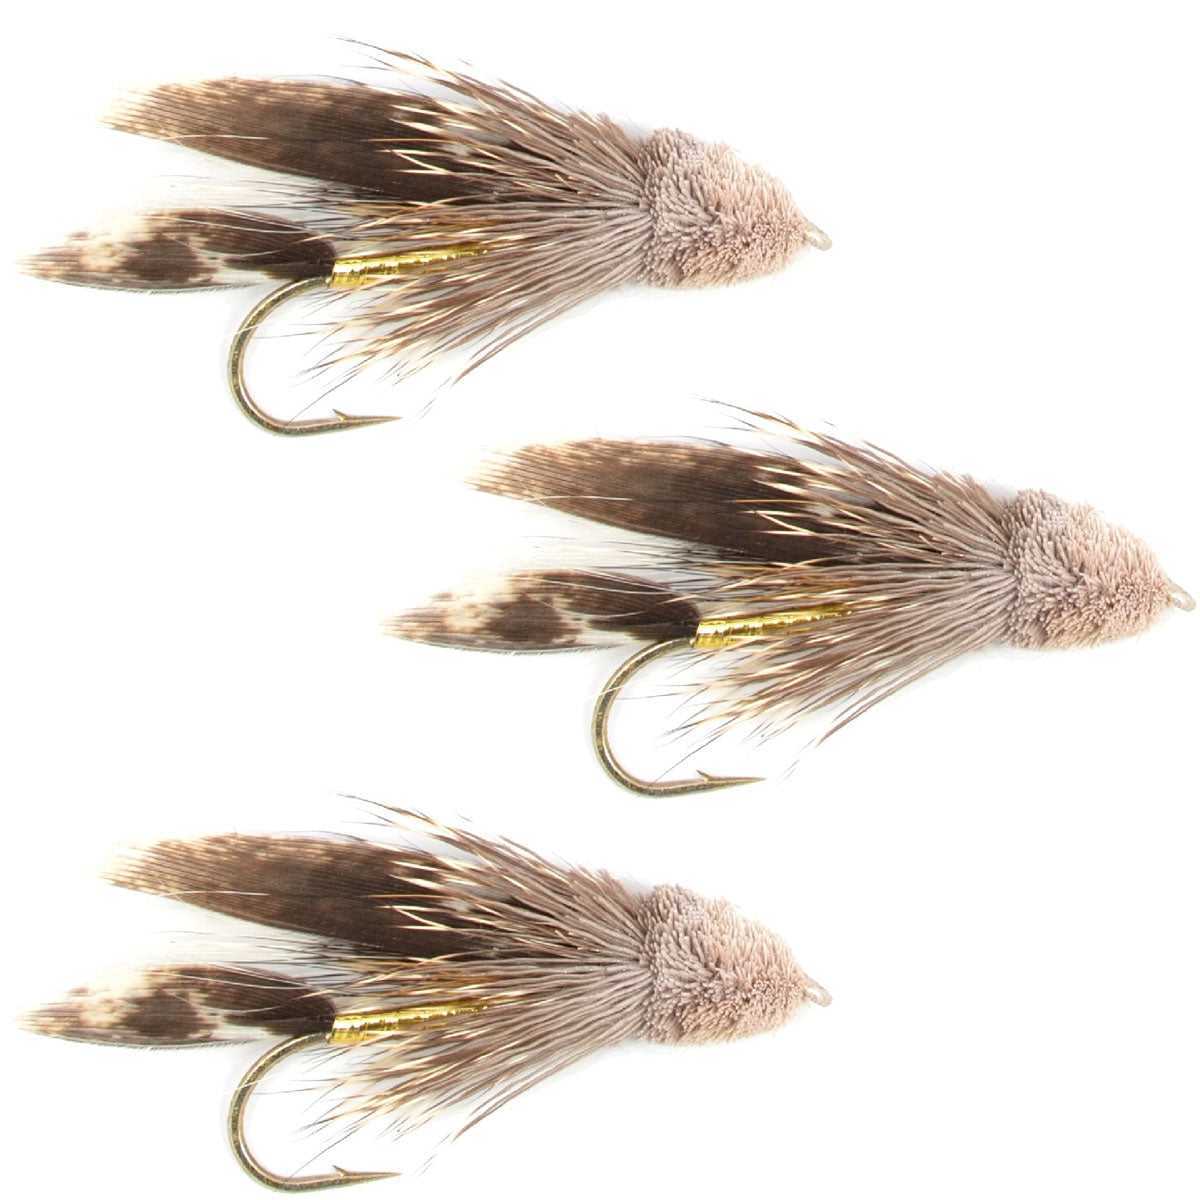 3 Pack Muddler Minnow Trout and Bass Streamer Fly - Hook Size 8